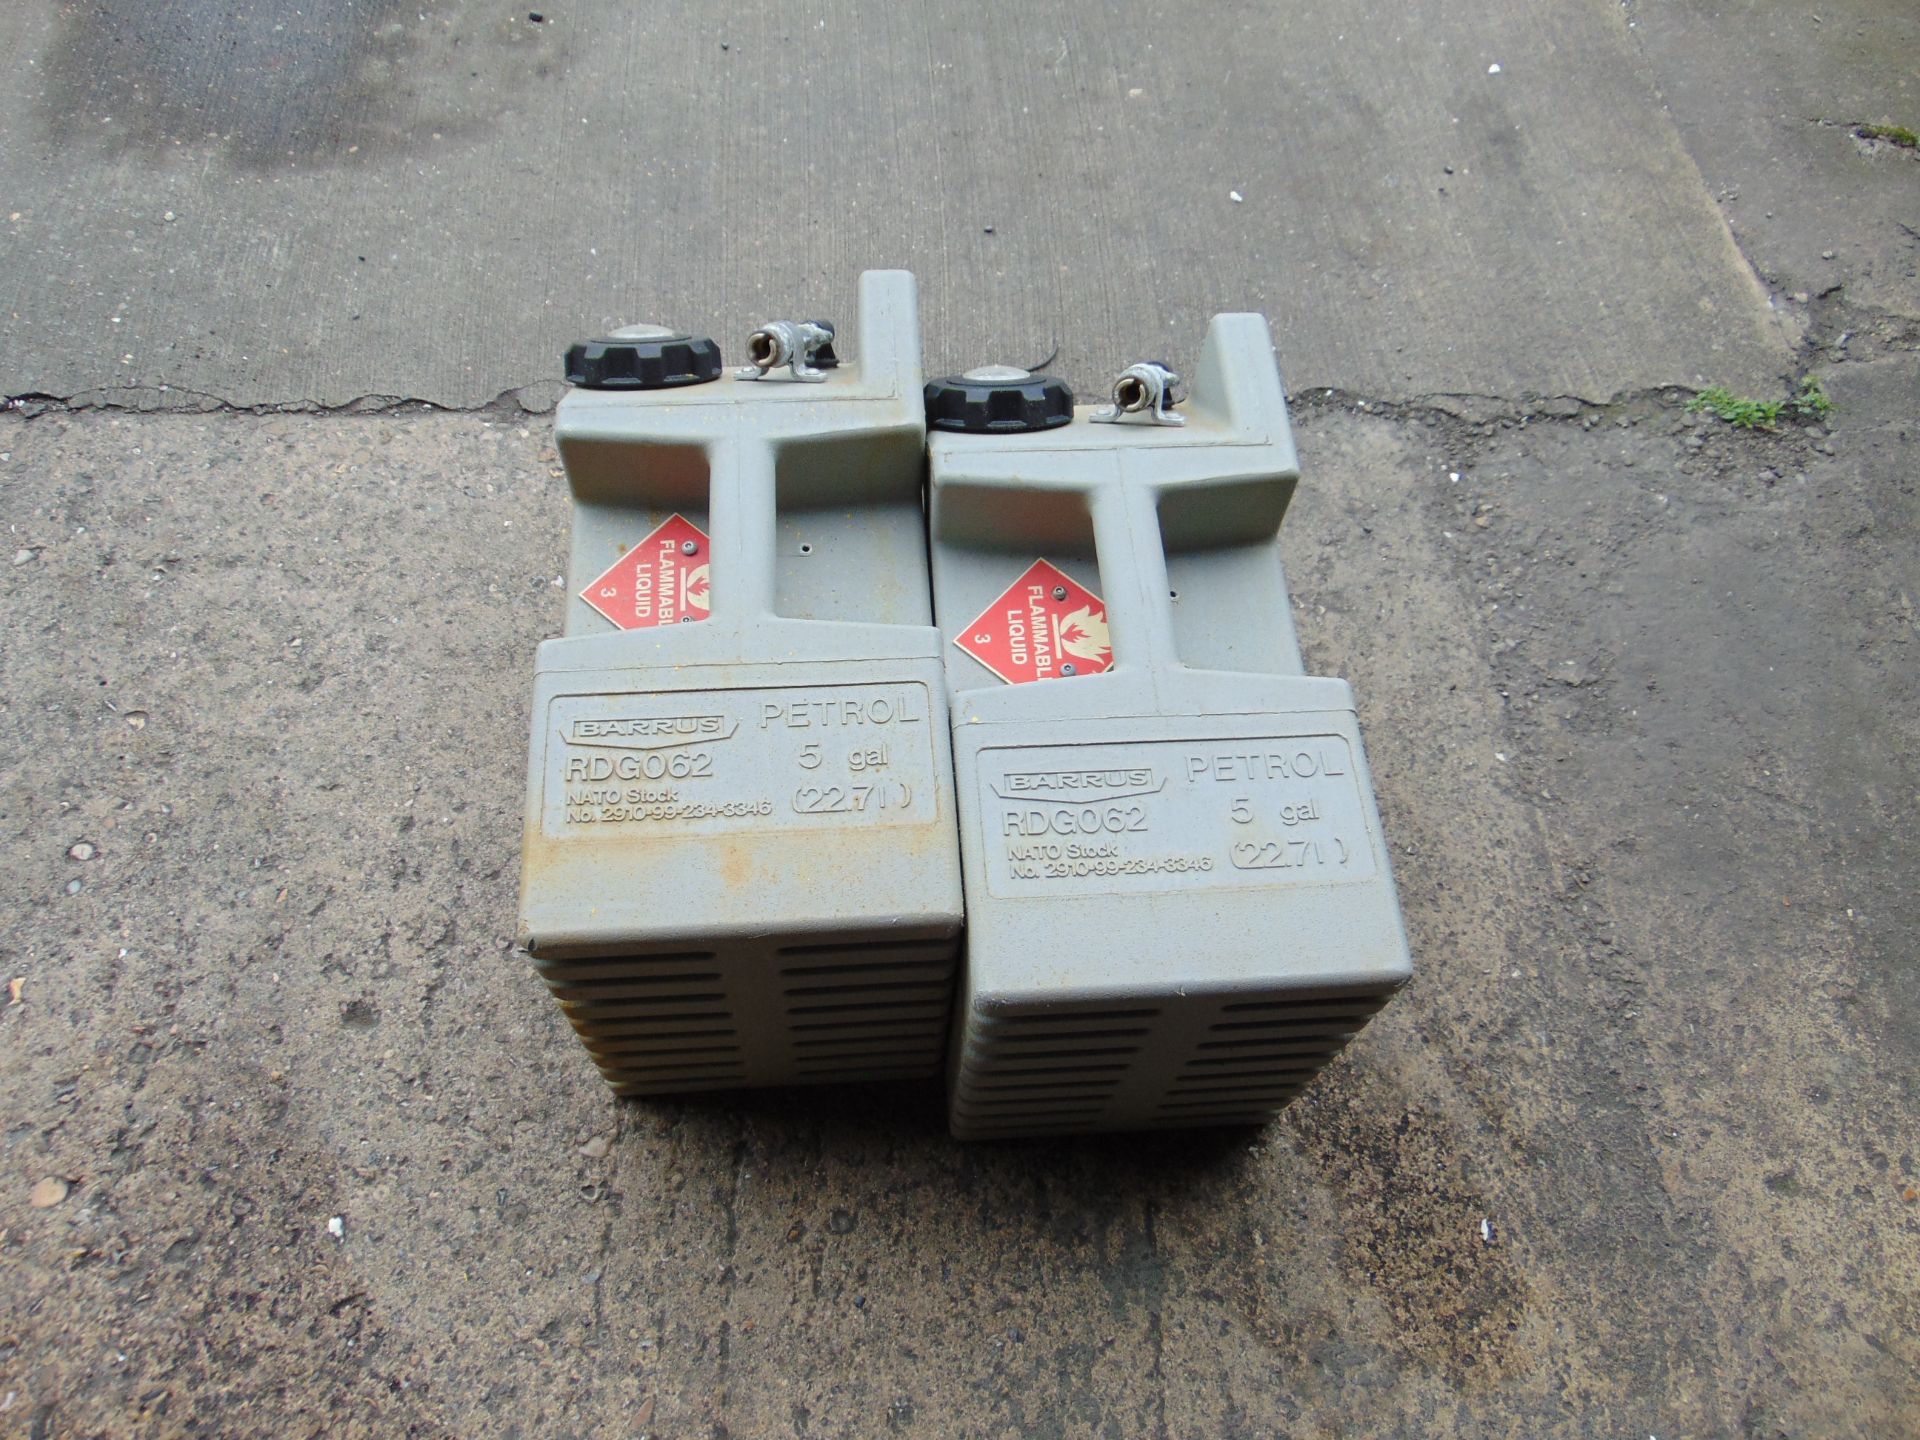 2 x Barrus RDG 62 5 gall Marine Fuel Tanks for Ribs etc c/w quick fit couplings and Guage - Image 3 of 4